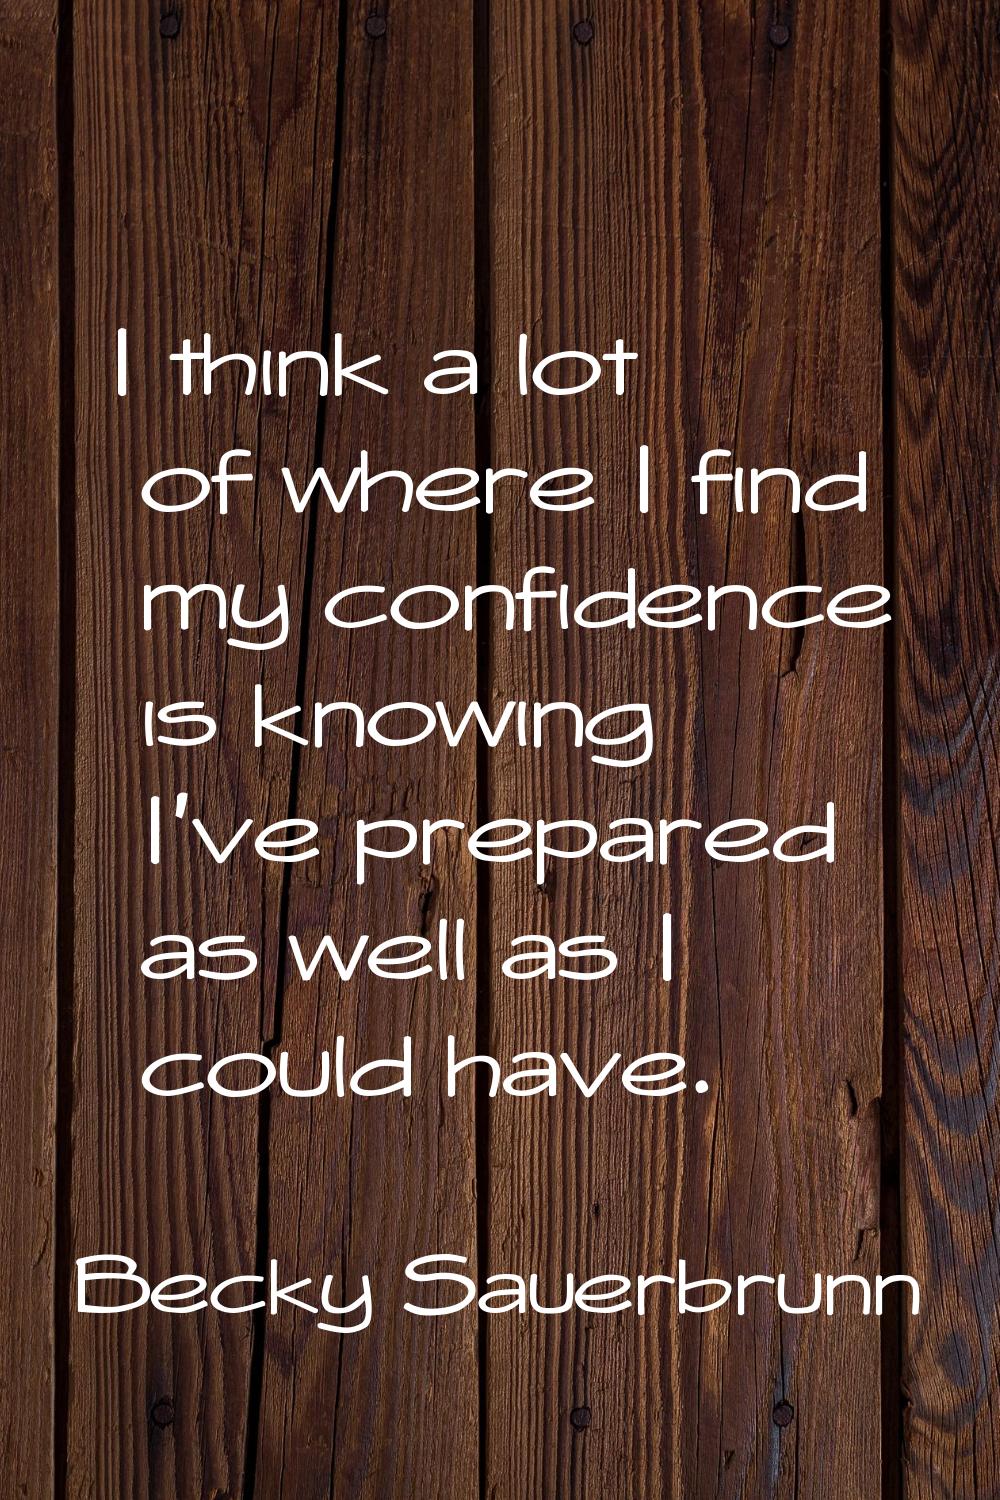 I think a lot of where I find my confidence is knowing I've prepared as well as I could have.